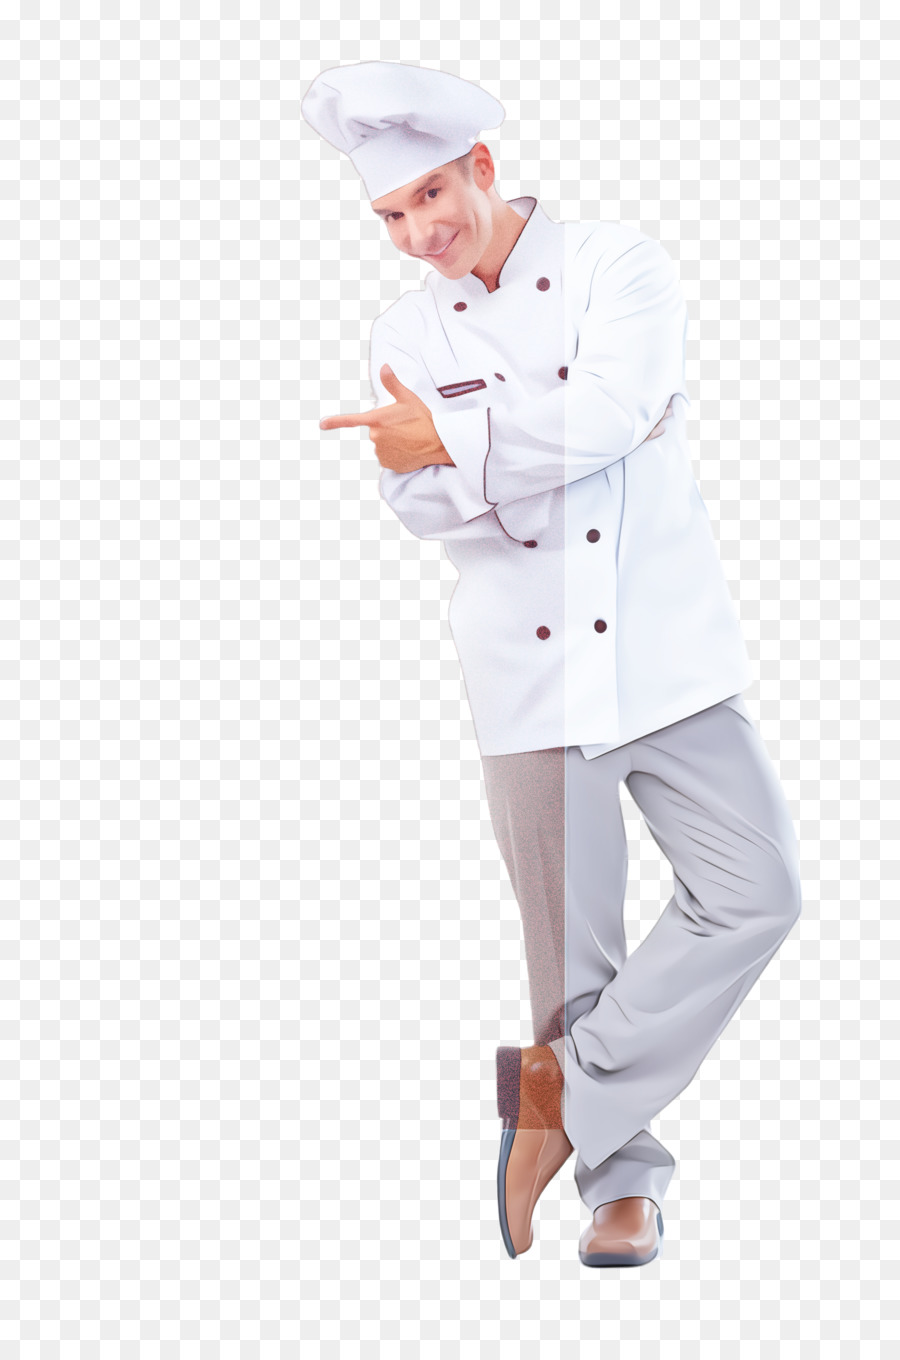 white clothing chef's uniform cook chef